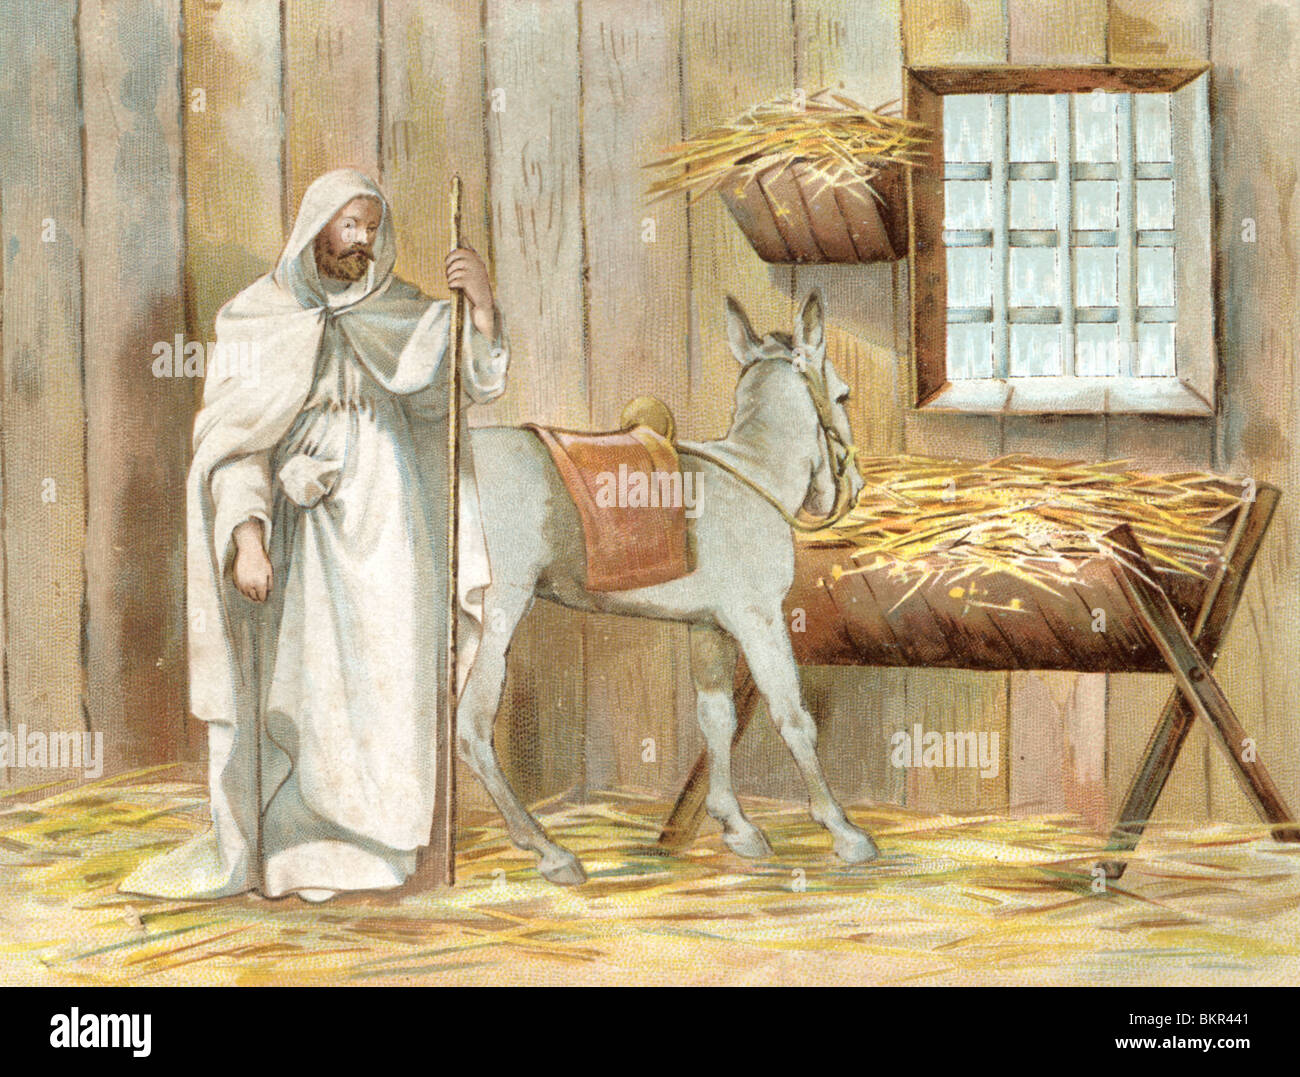 Christmas Nativity Scene - The Manger in the Stable Stock Photo